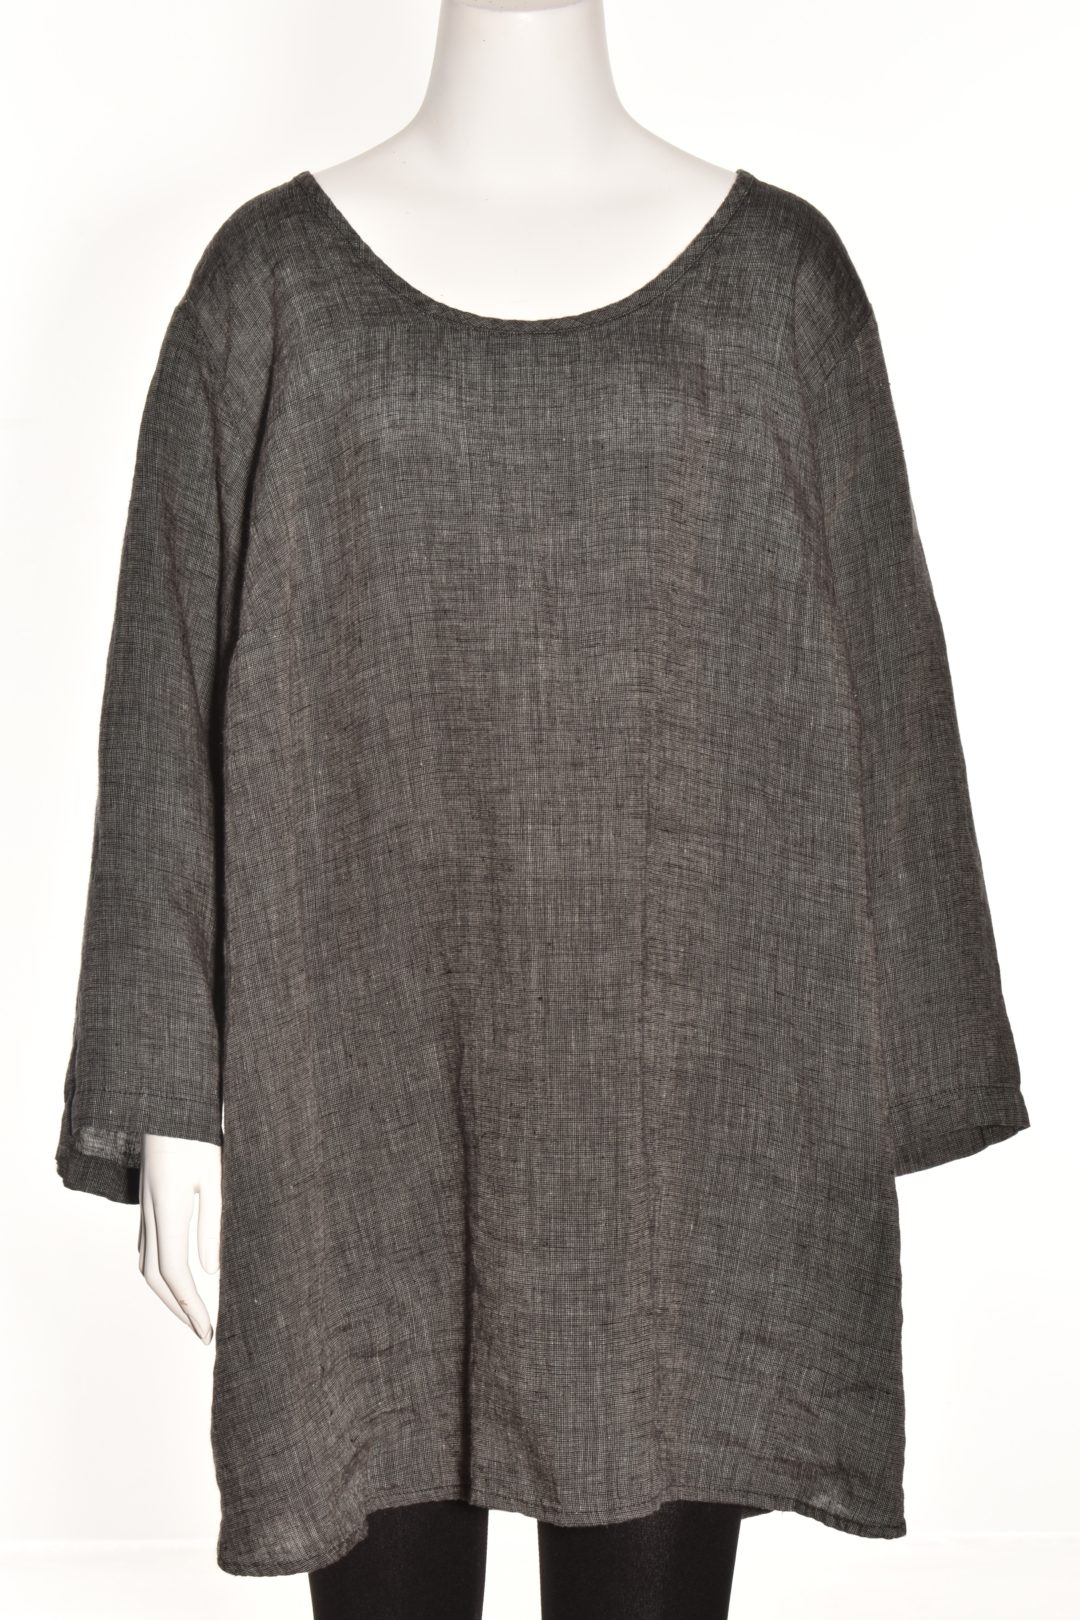 Flax Soft Tunic, 100% linen. Scoop neck and three-quarter sleeves - Lea's